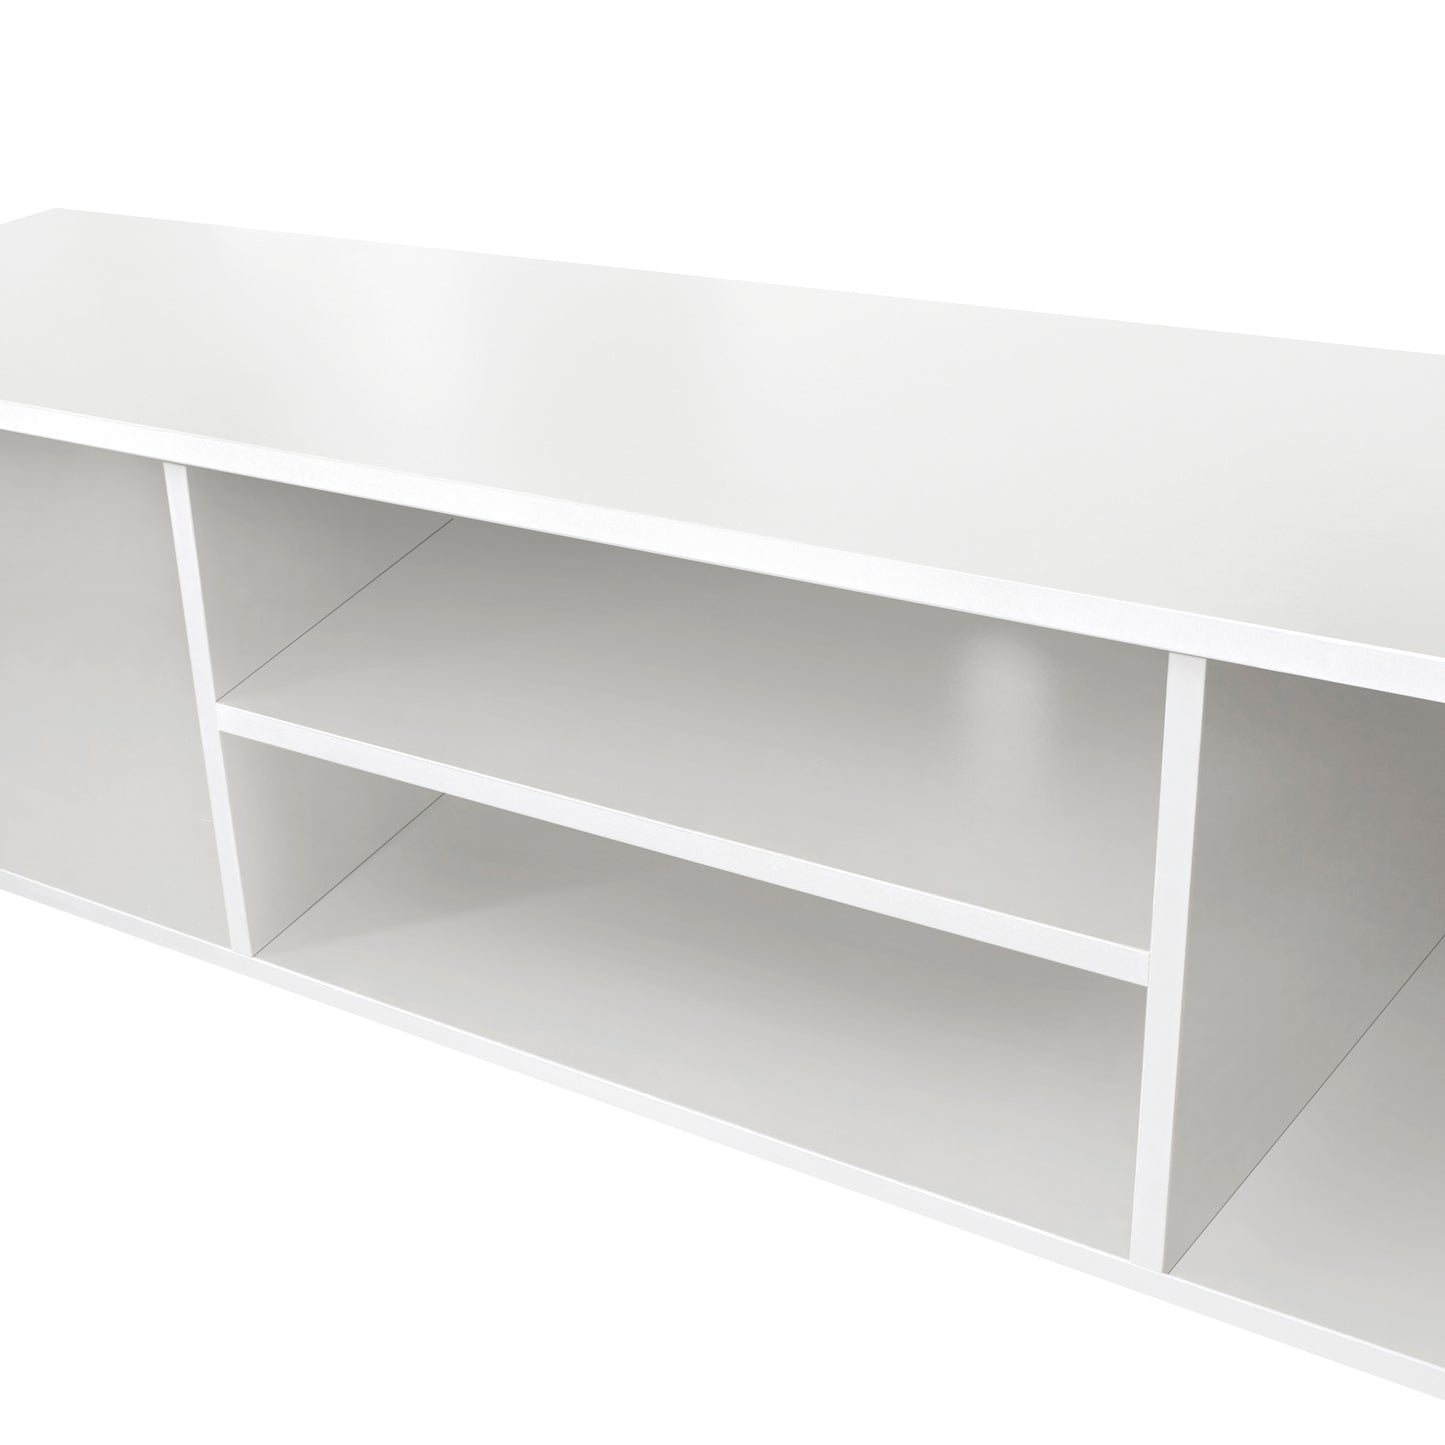 Athens White 70" TV Stand